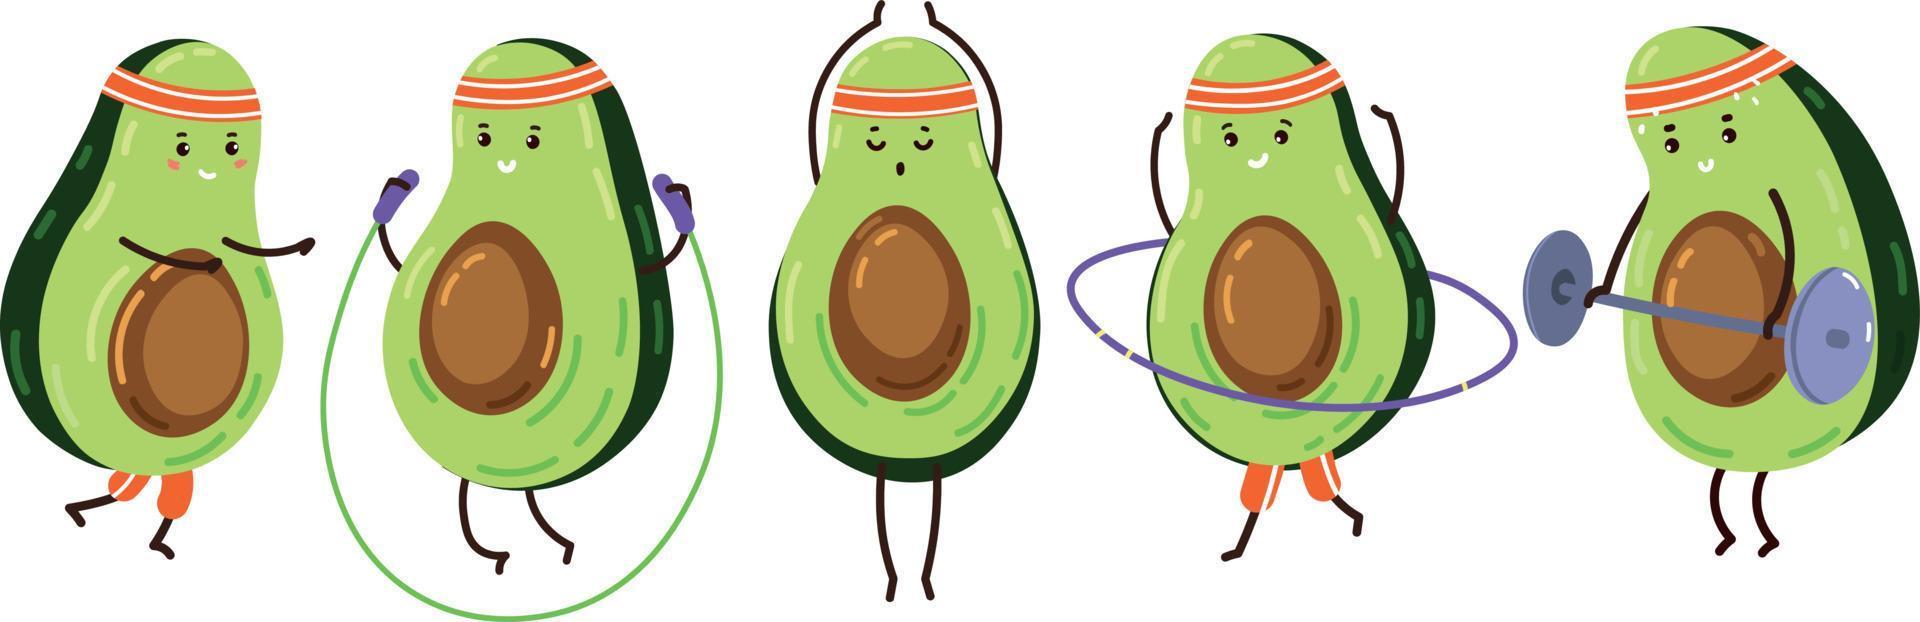 Set of Funny Sports Avocado Characters vector